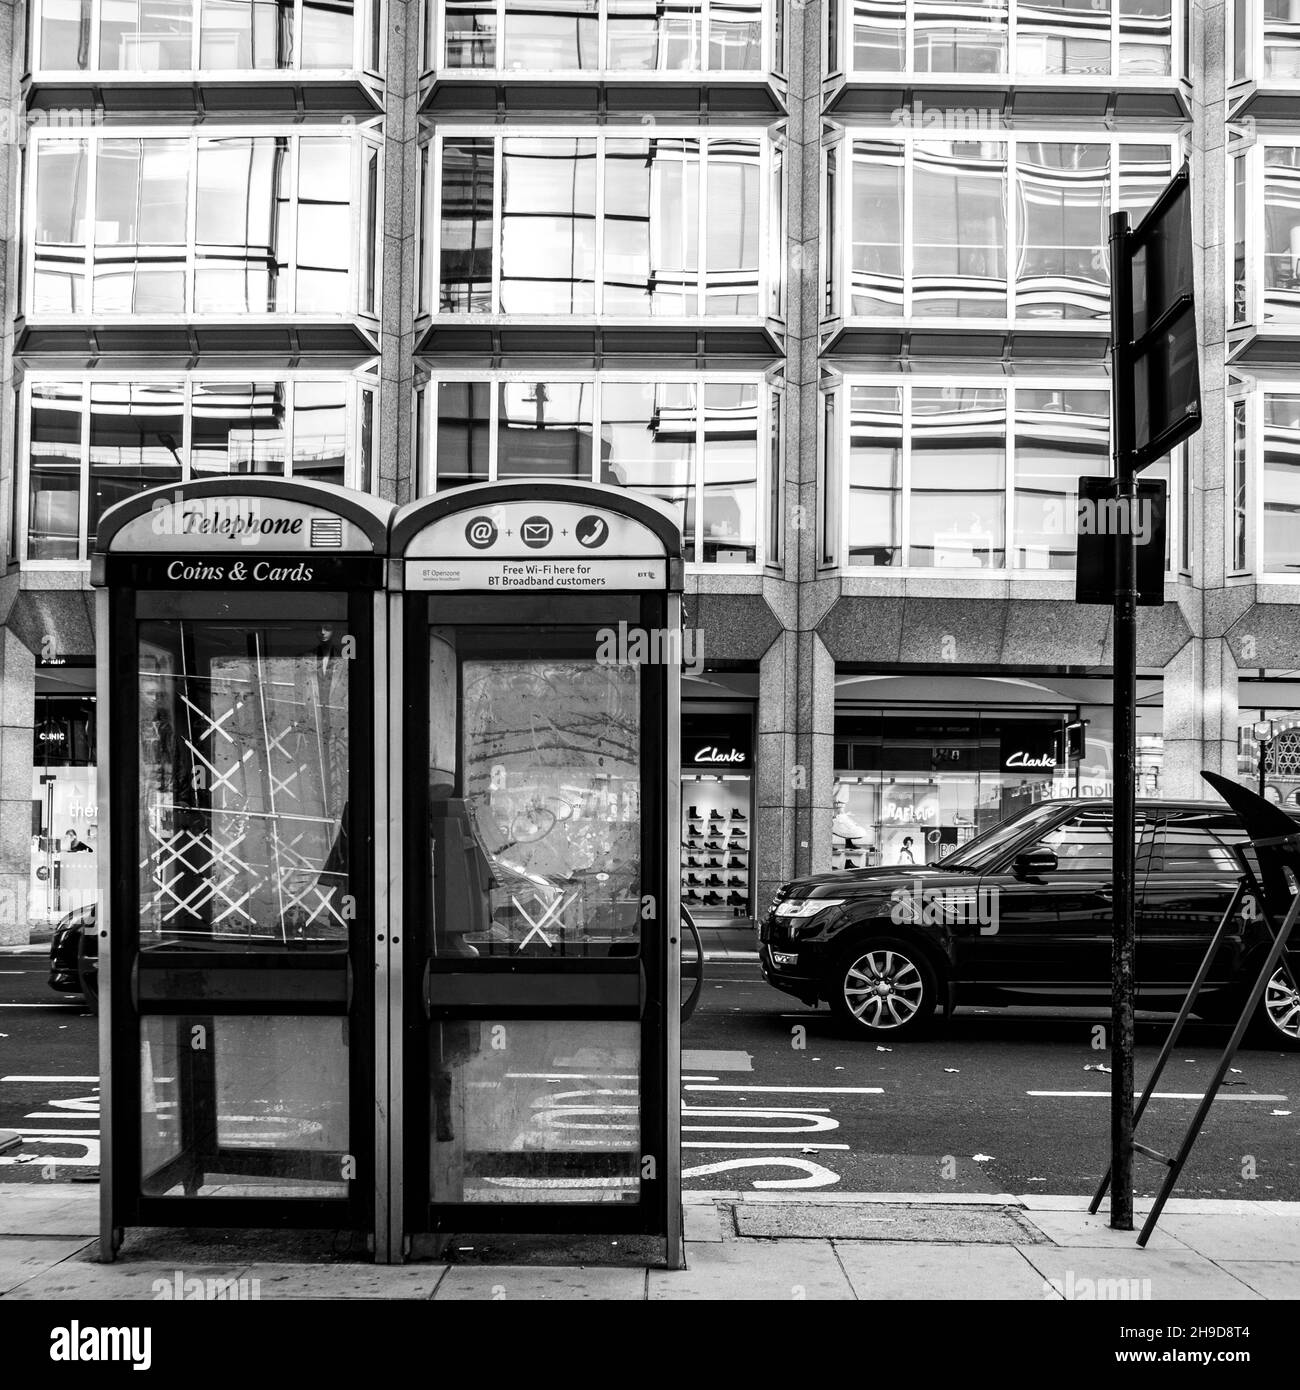 London Street Scene Telephone Box High Resolution Stock Photography and  Images - Alamy